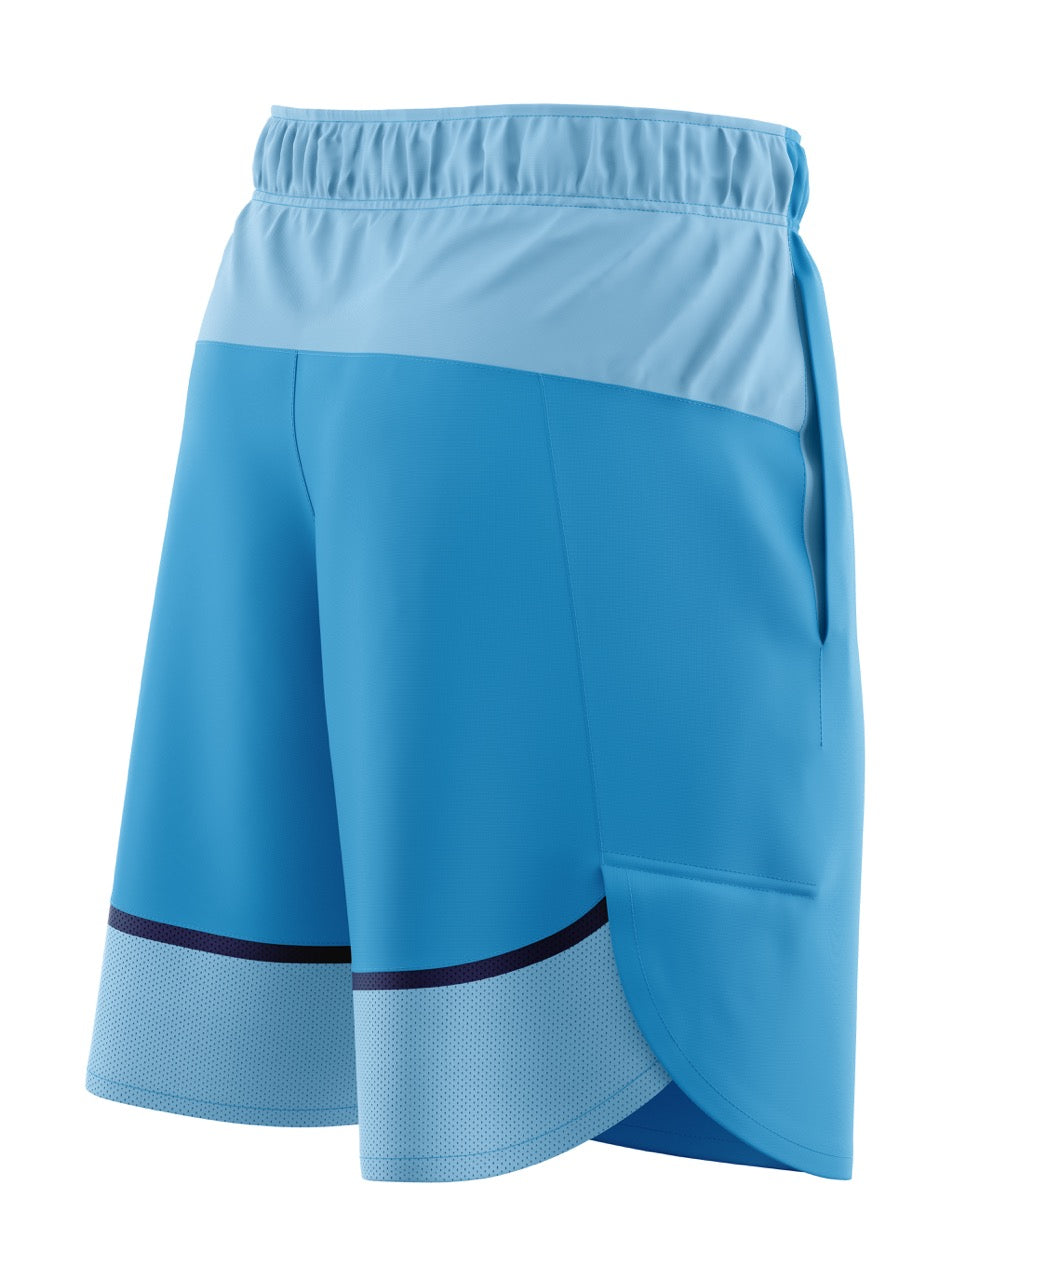 LSG Player Practice Shorts